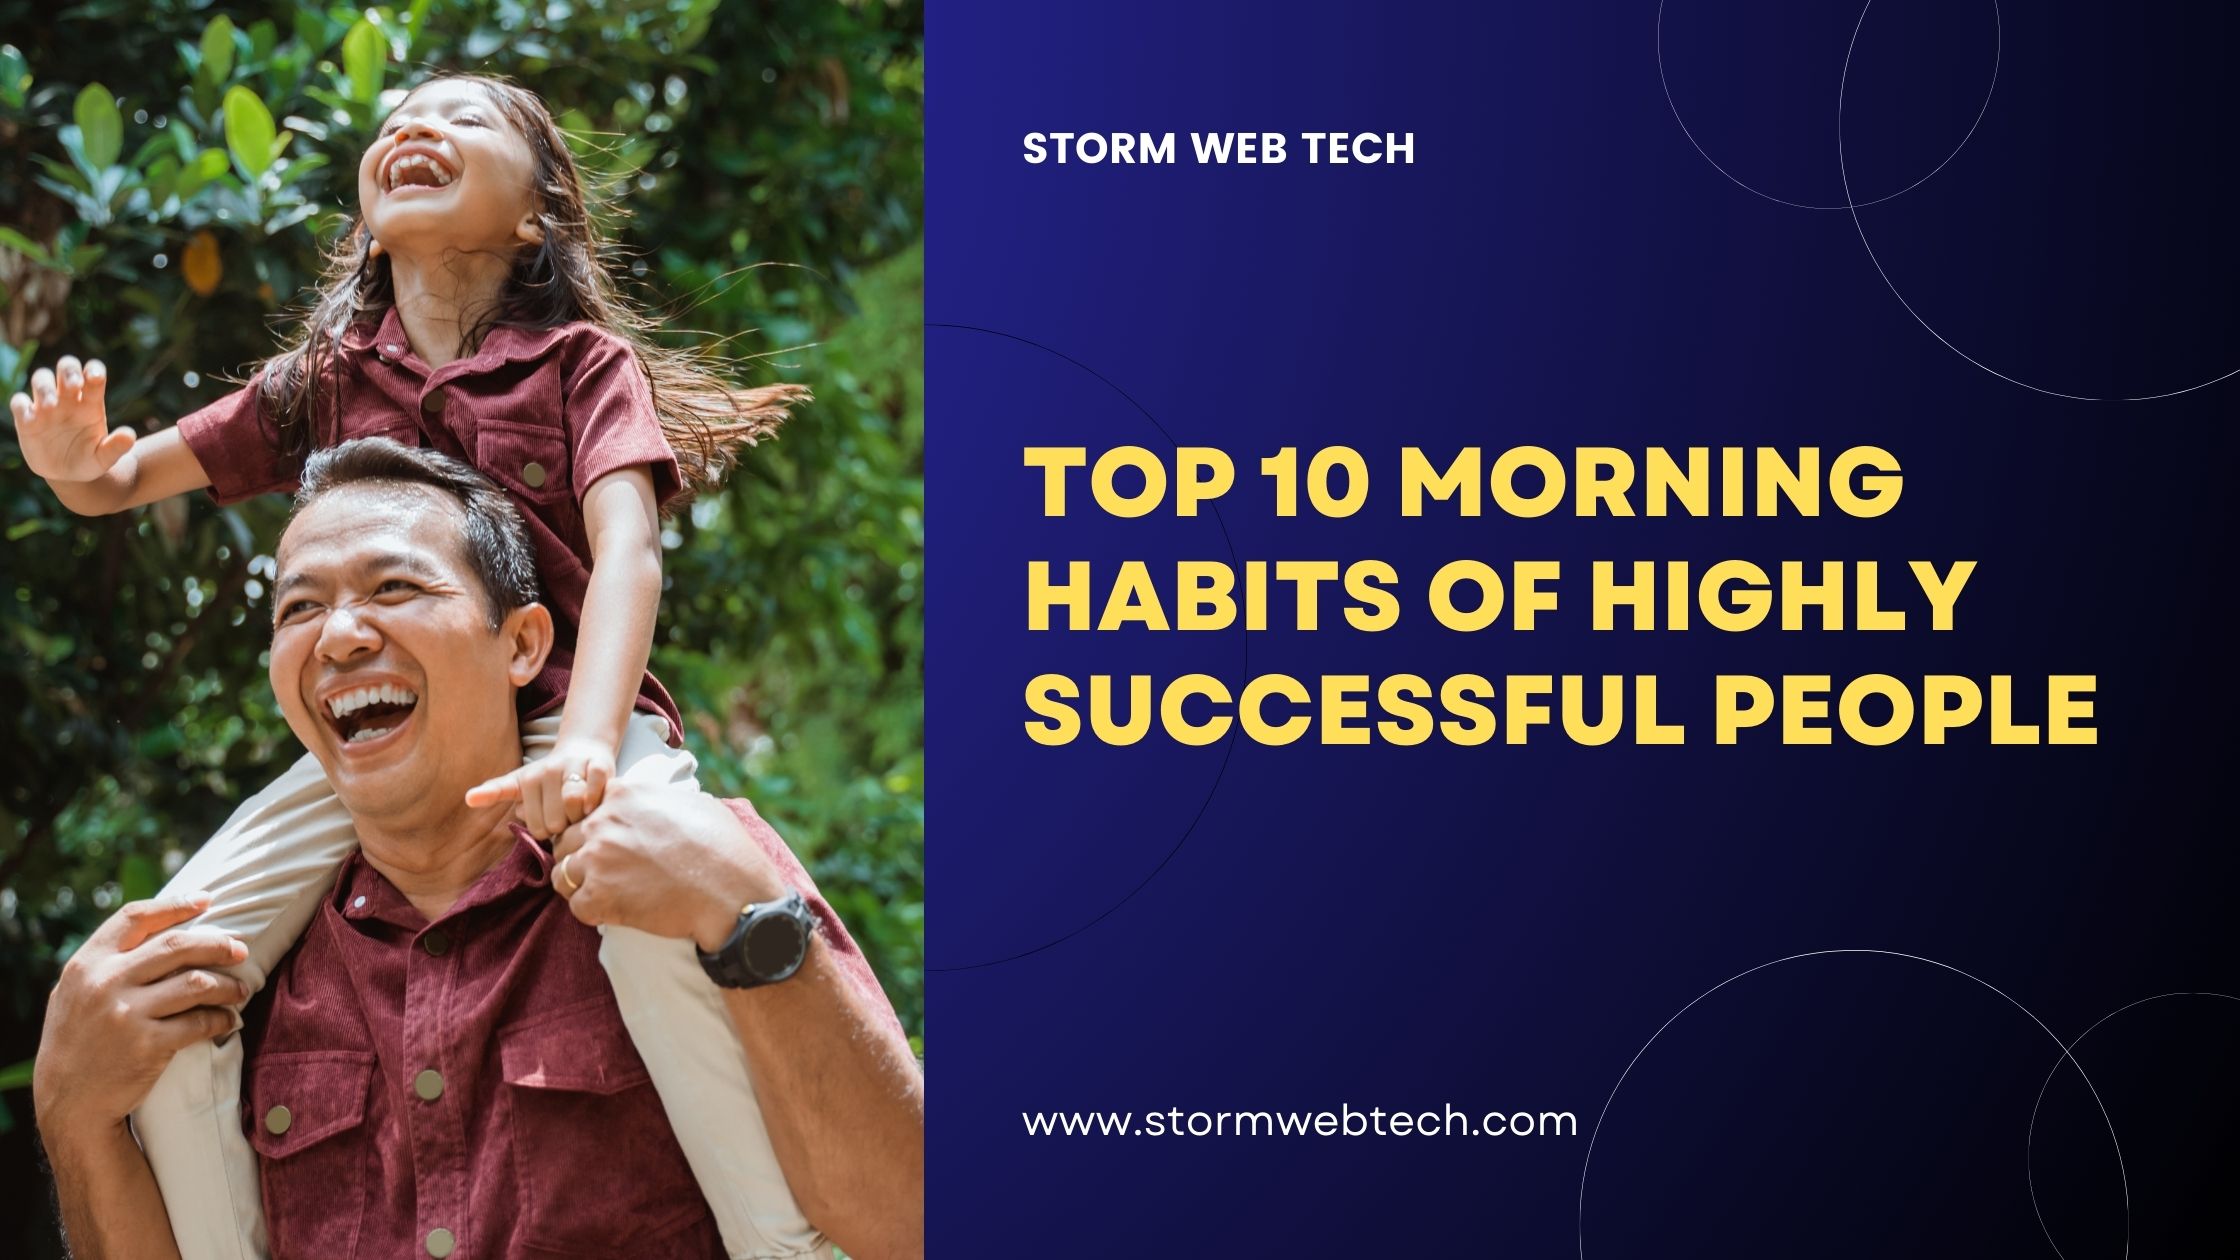 Highly successful people often have very specific morning routines that they follow. the top 10 morning habits of highly successful people